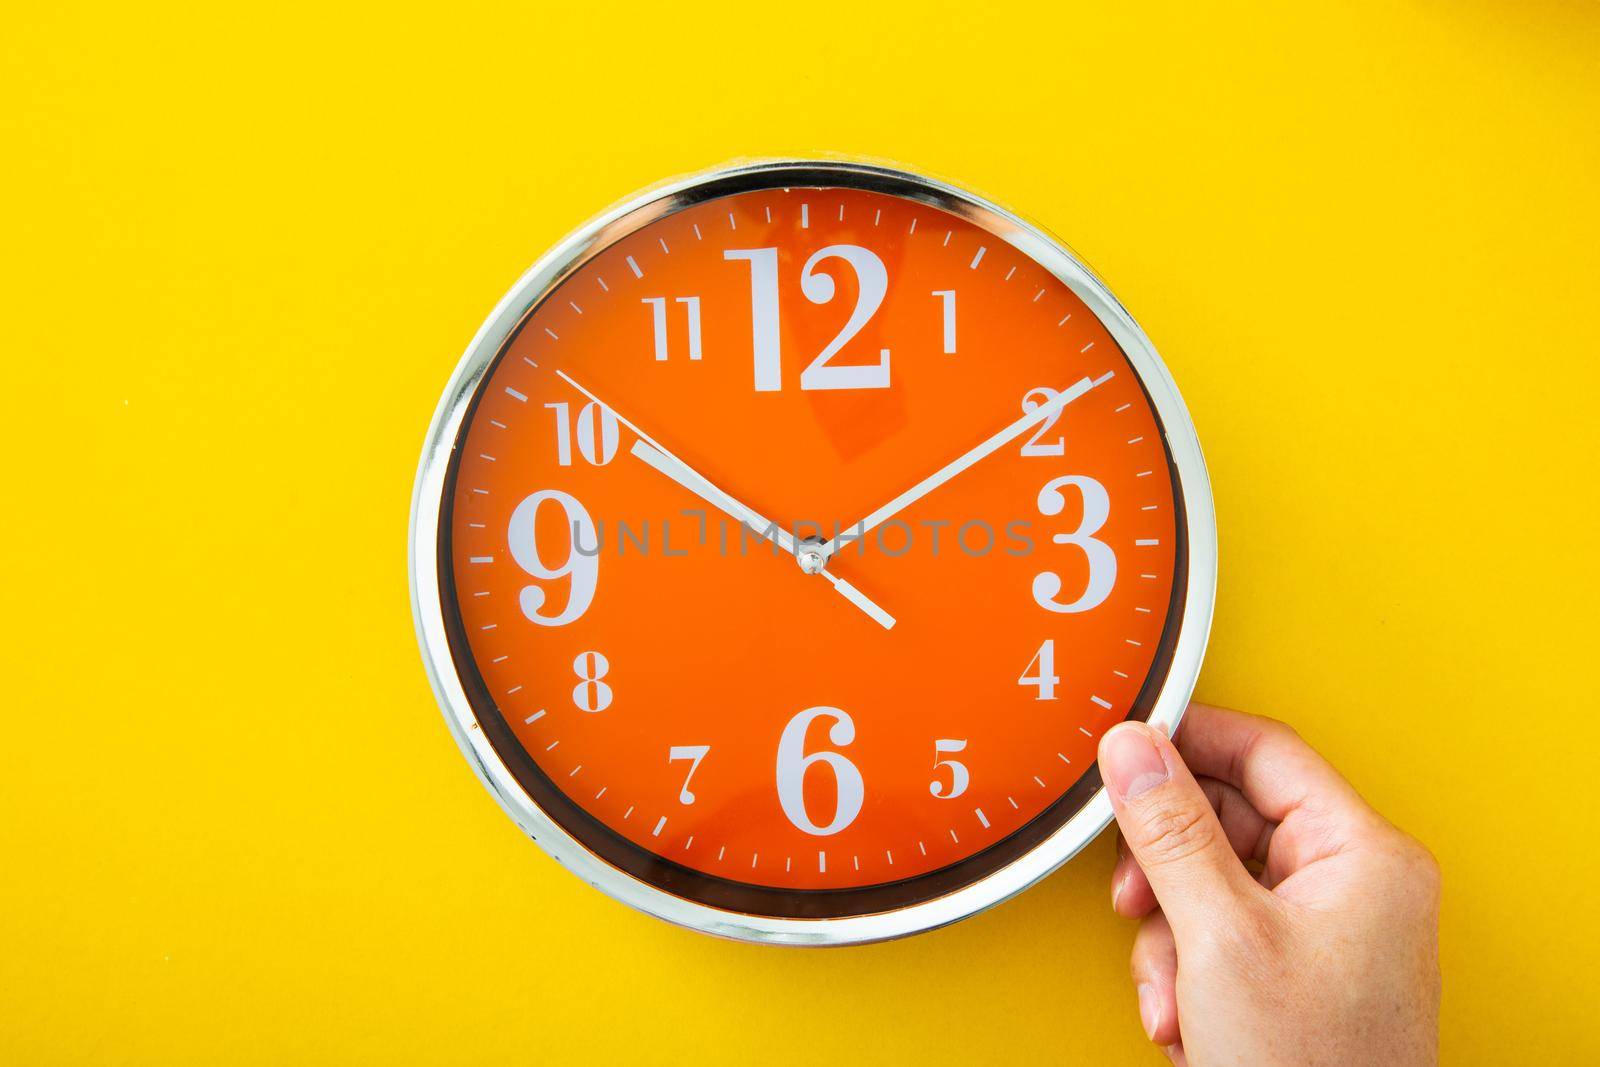 Hand holding alarm clock on isolated yellow background.